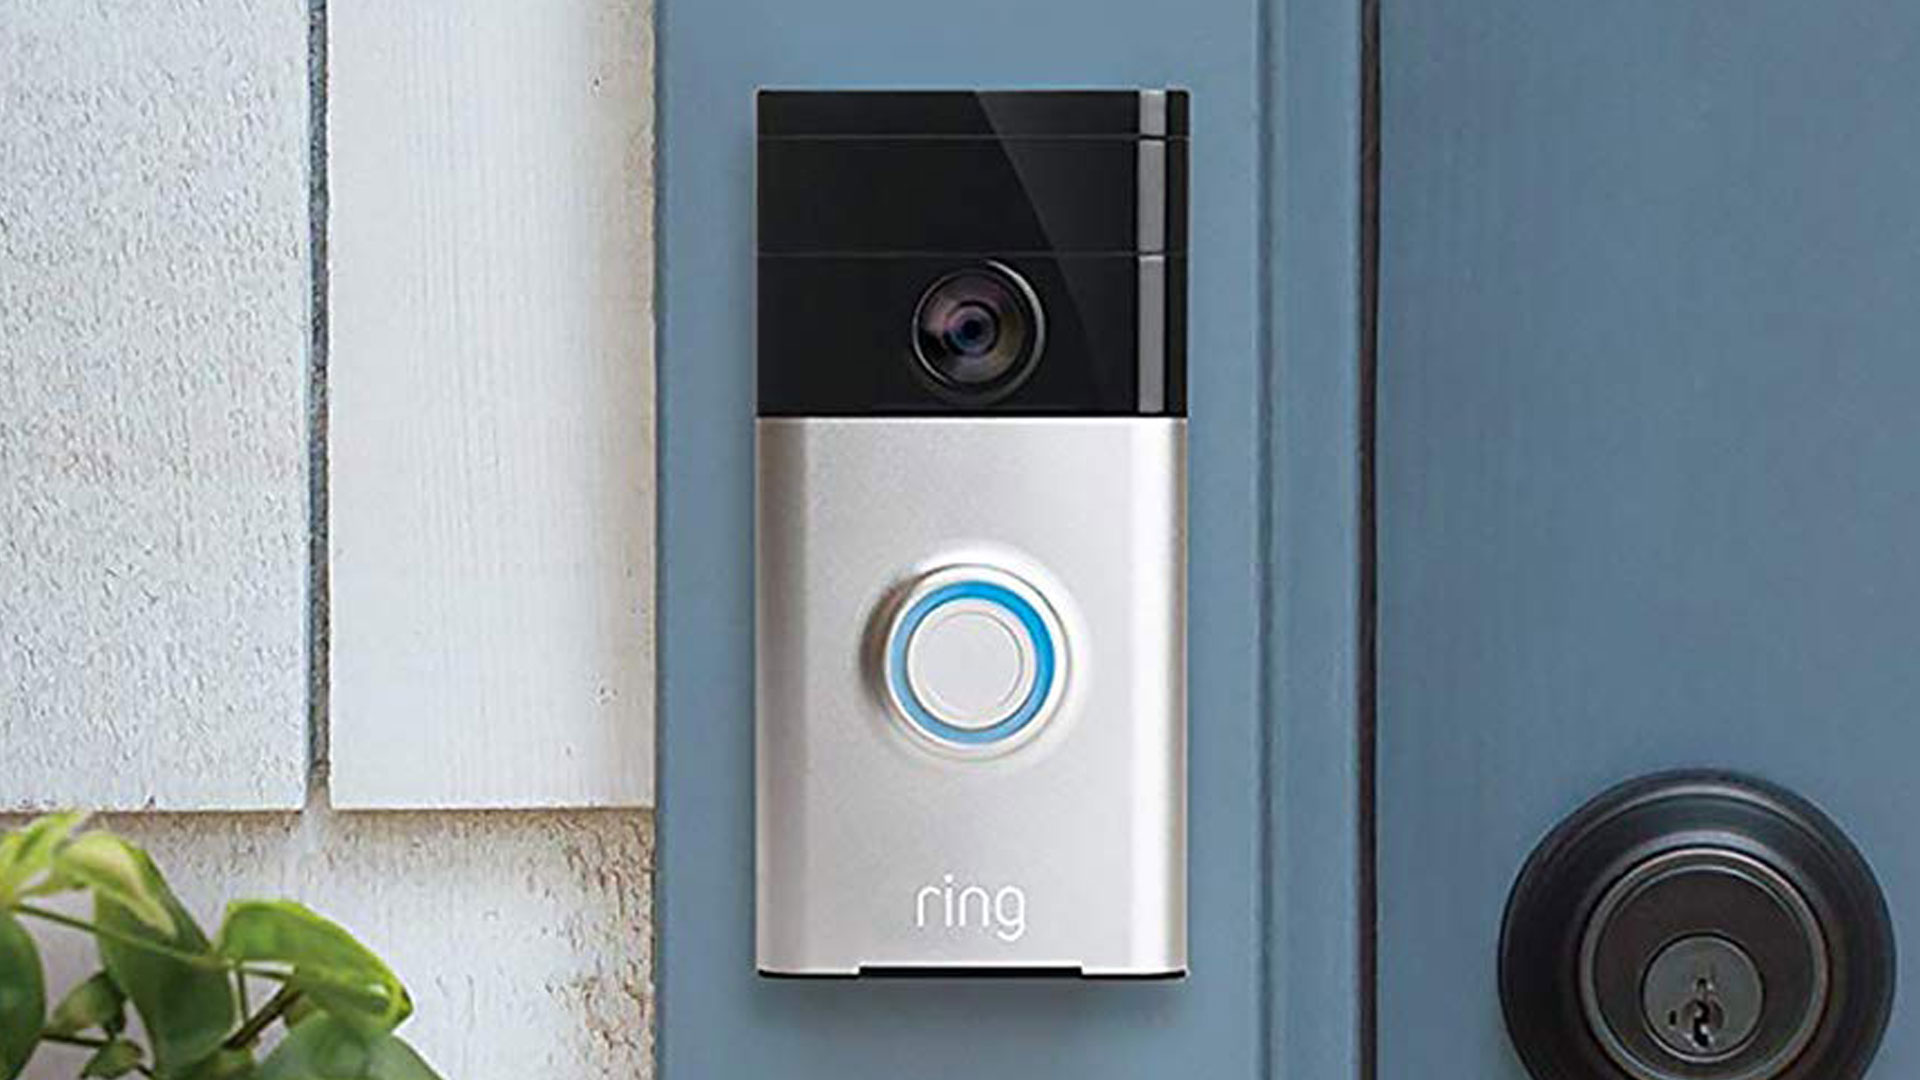 Warning to THOUSANDS OF Ring doorbell owners after Amazon released police footage with NO owner permission